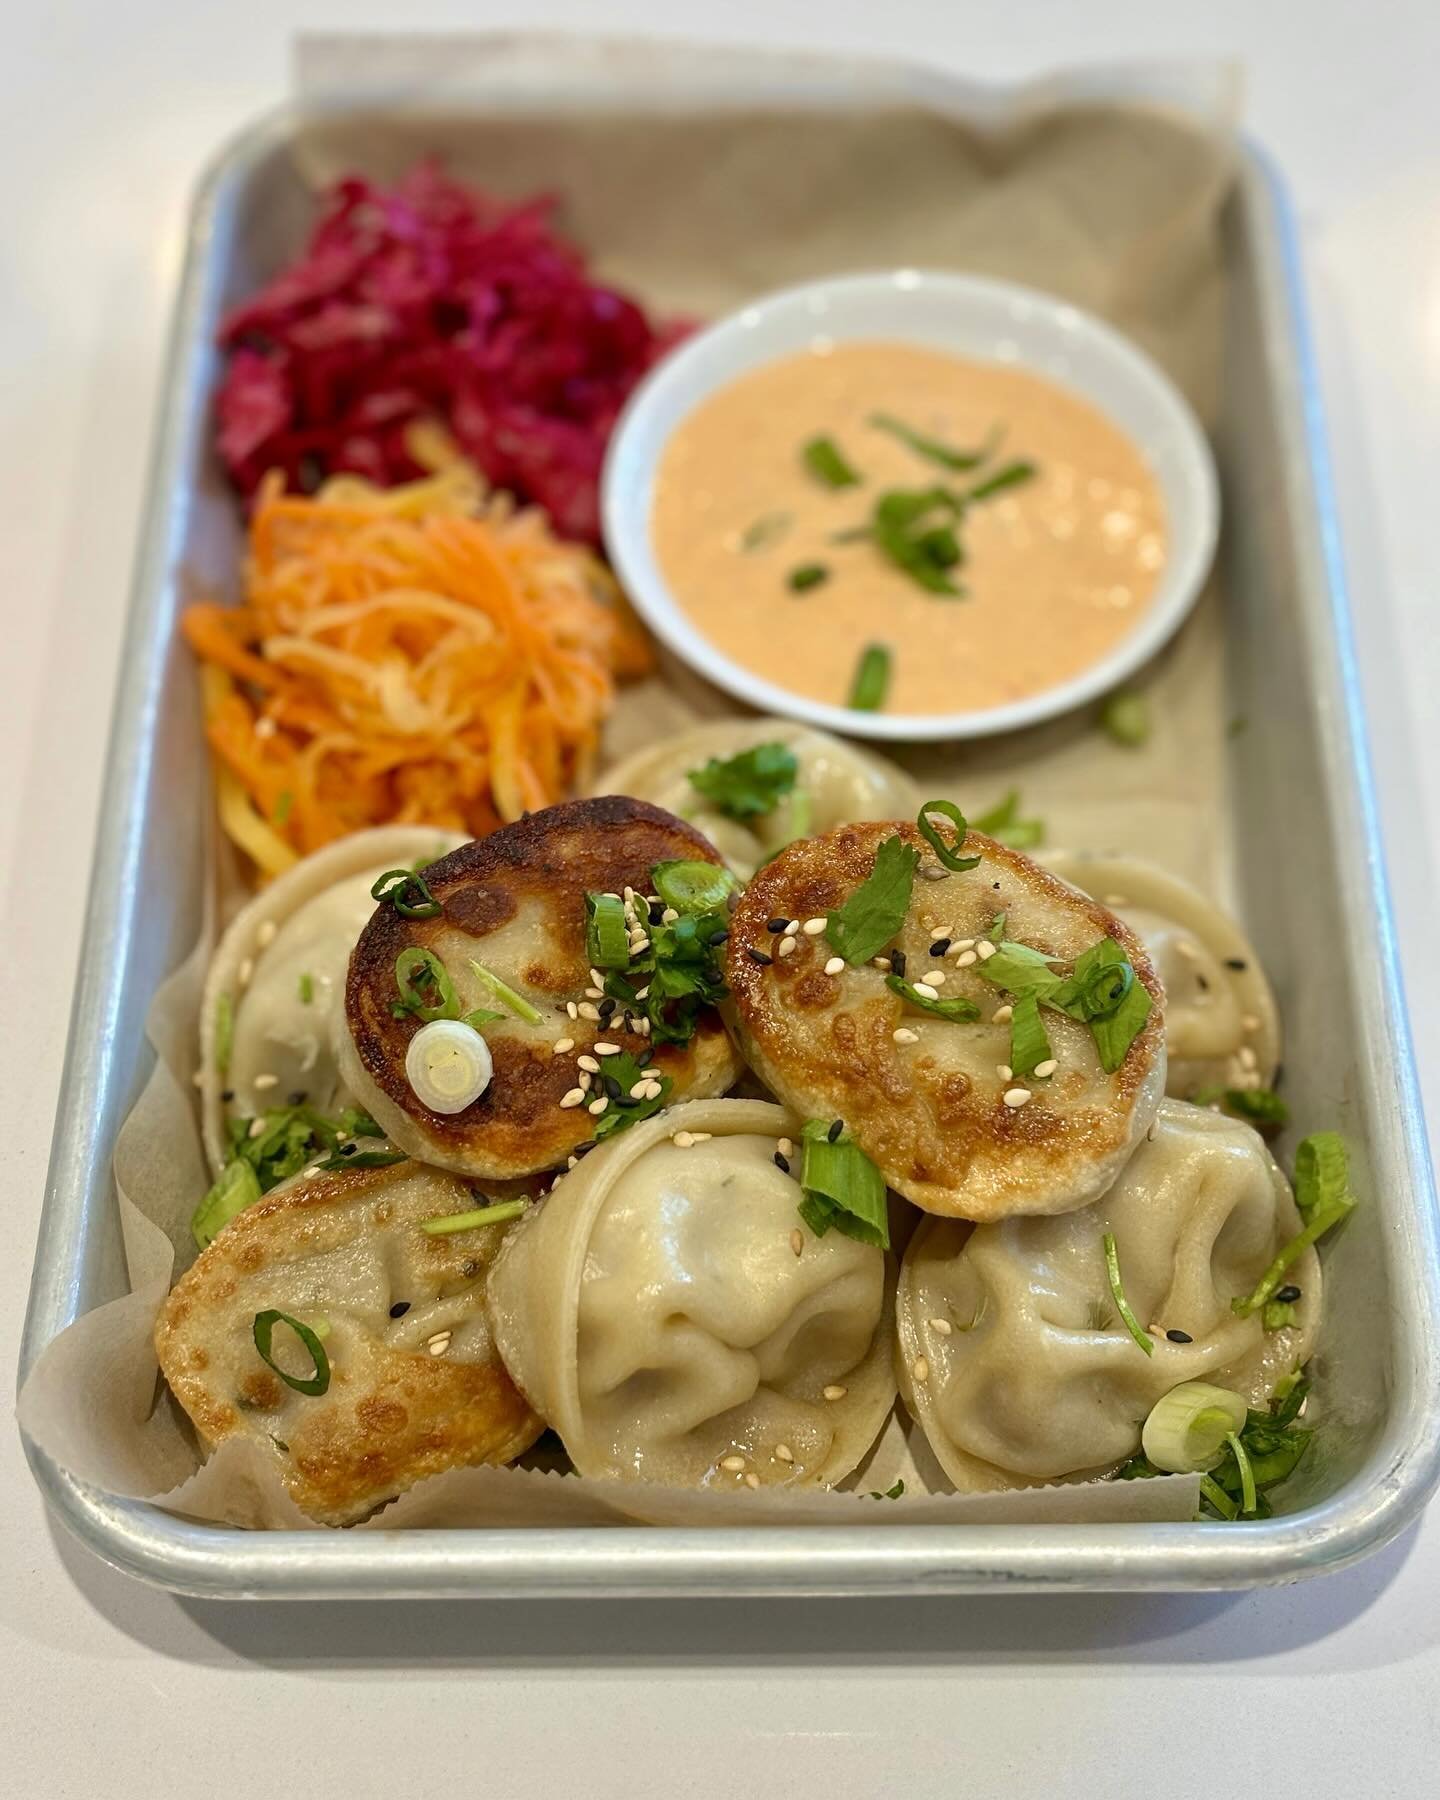 🎊Tomorrow kicks off Asian Restaurant Week and here is what Mei Mei is serving up🧑🏻&zwj;🍳

🗓️From May 3rd-May 11th Mei Mei and other local AAPI businesses will be highlighting special menu items that could turn into prizes!

⭐️Our special Asian R